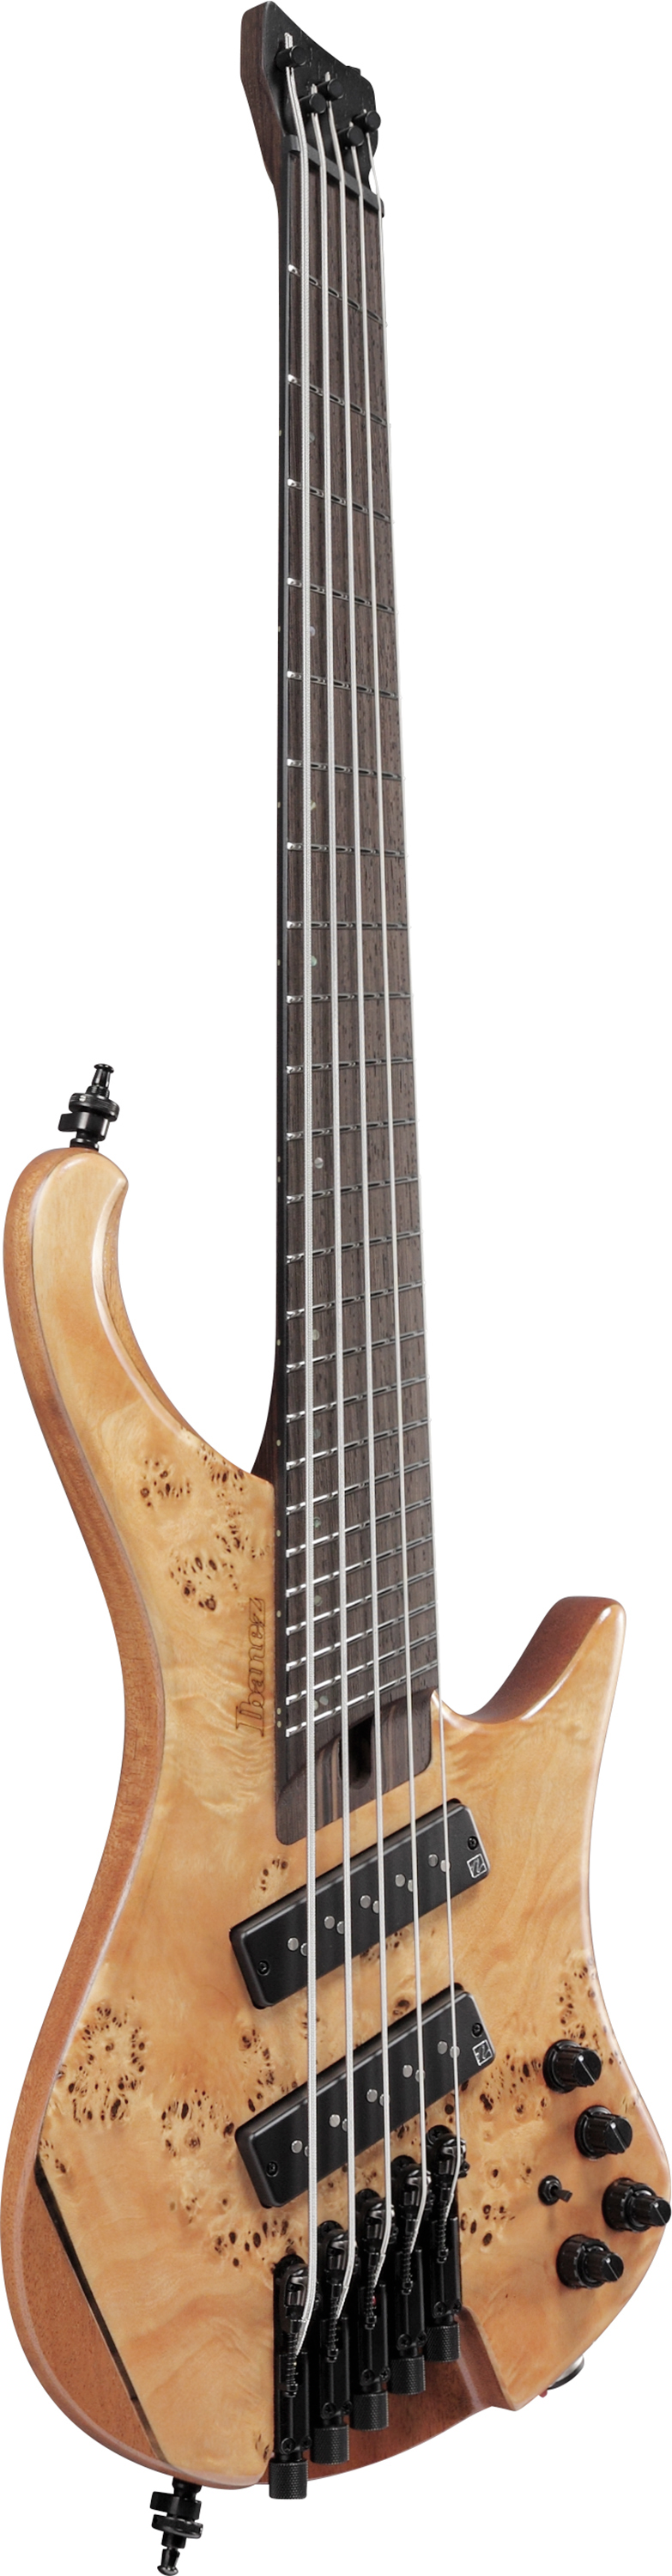 Ibanez Ehb1505ms Multi-scale 5-cordes Workshop Active Pp - Florid Natural Low Gloss - Solidbody E-bass - Variation 4